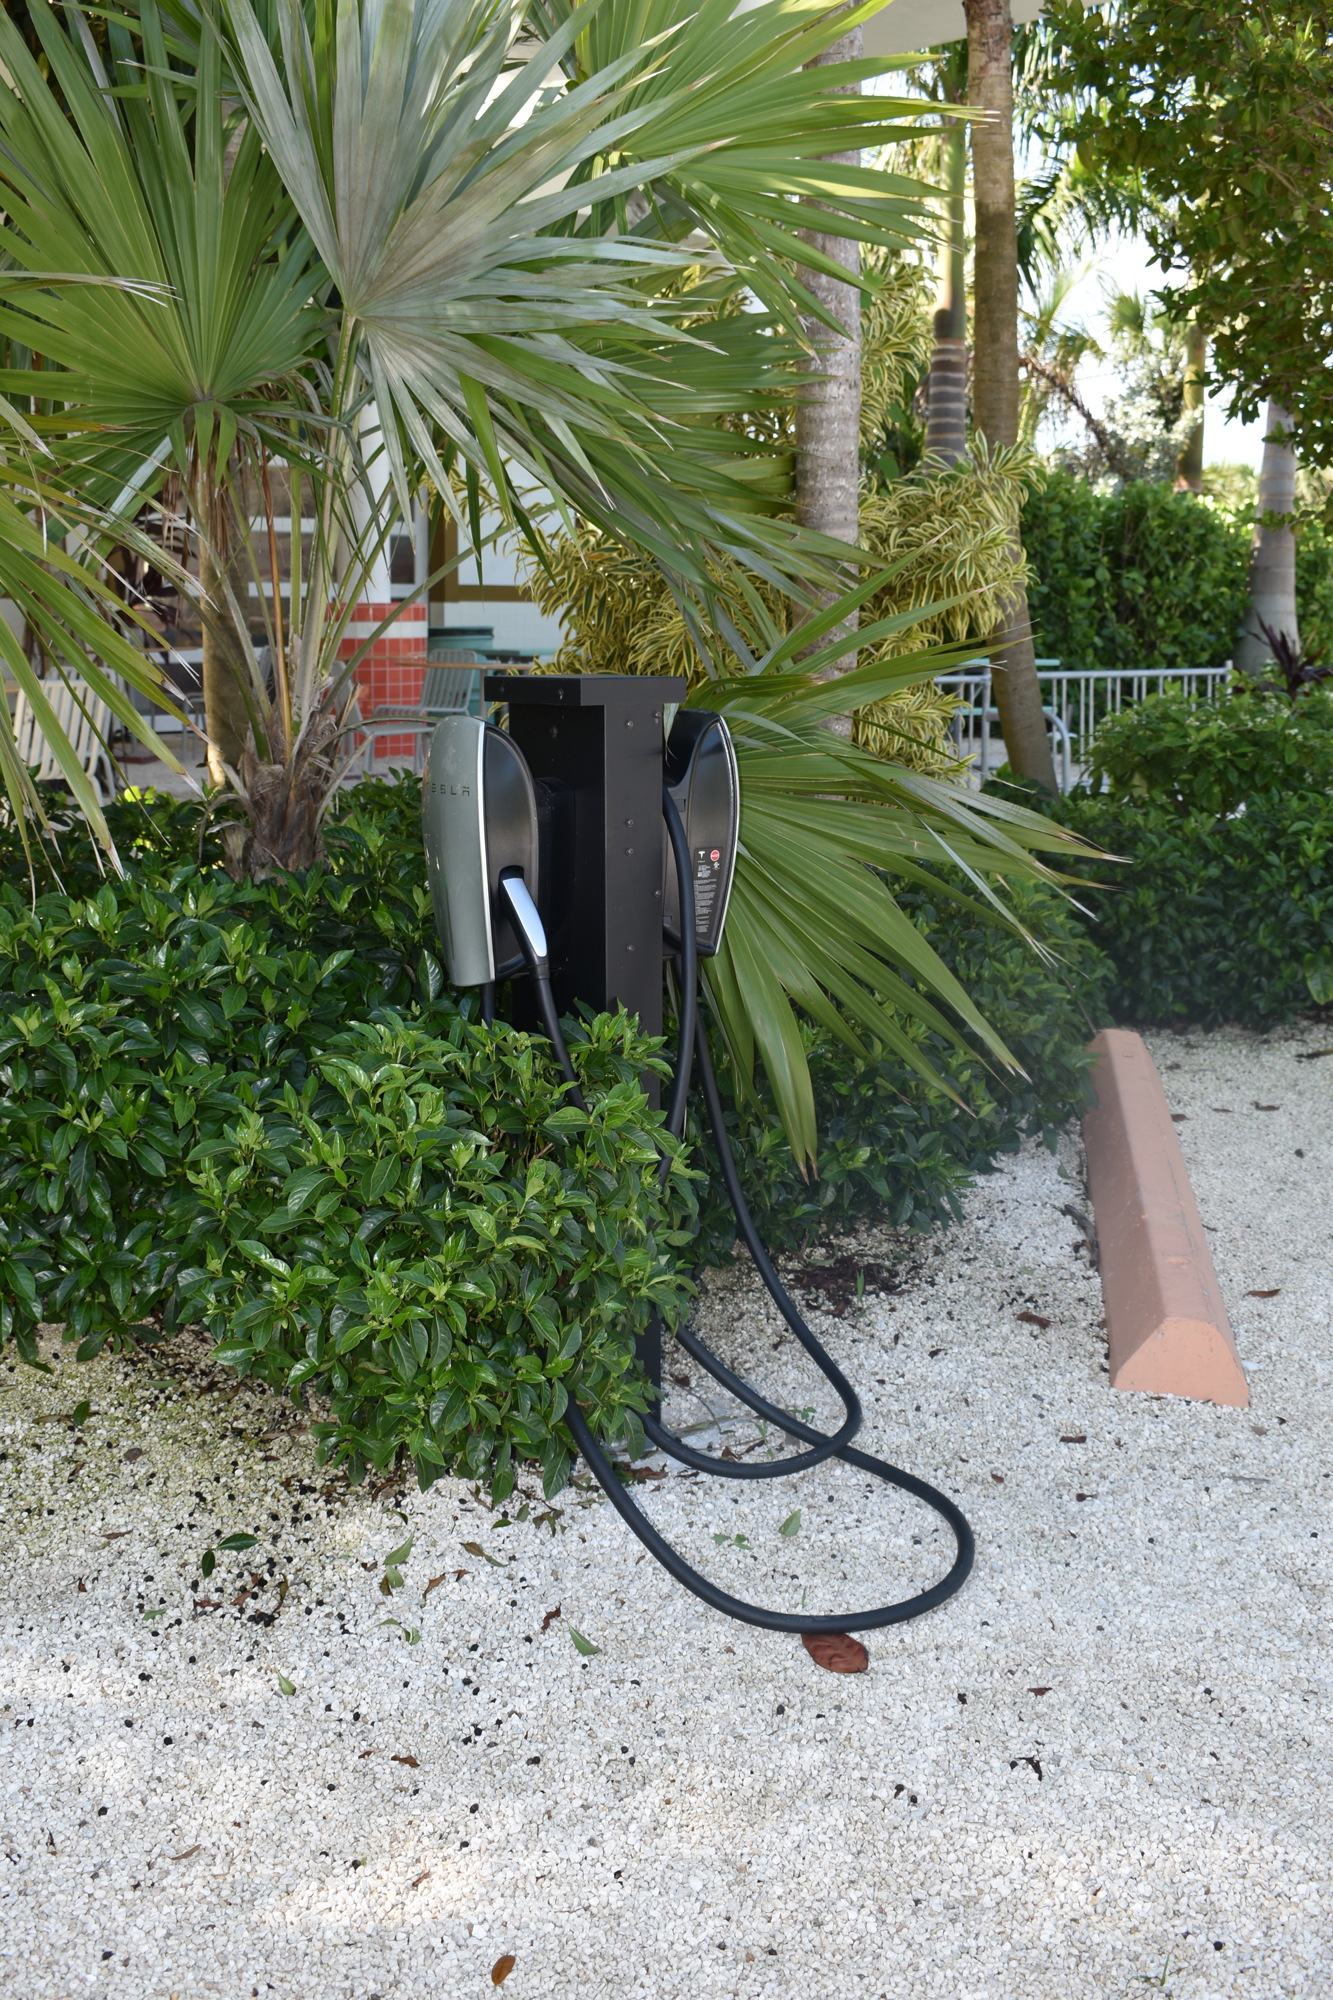 Whitney's at 6990 Gulf of Mexico Drive offers two Tesla electric vehicle chargers for restaurant customers.